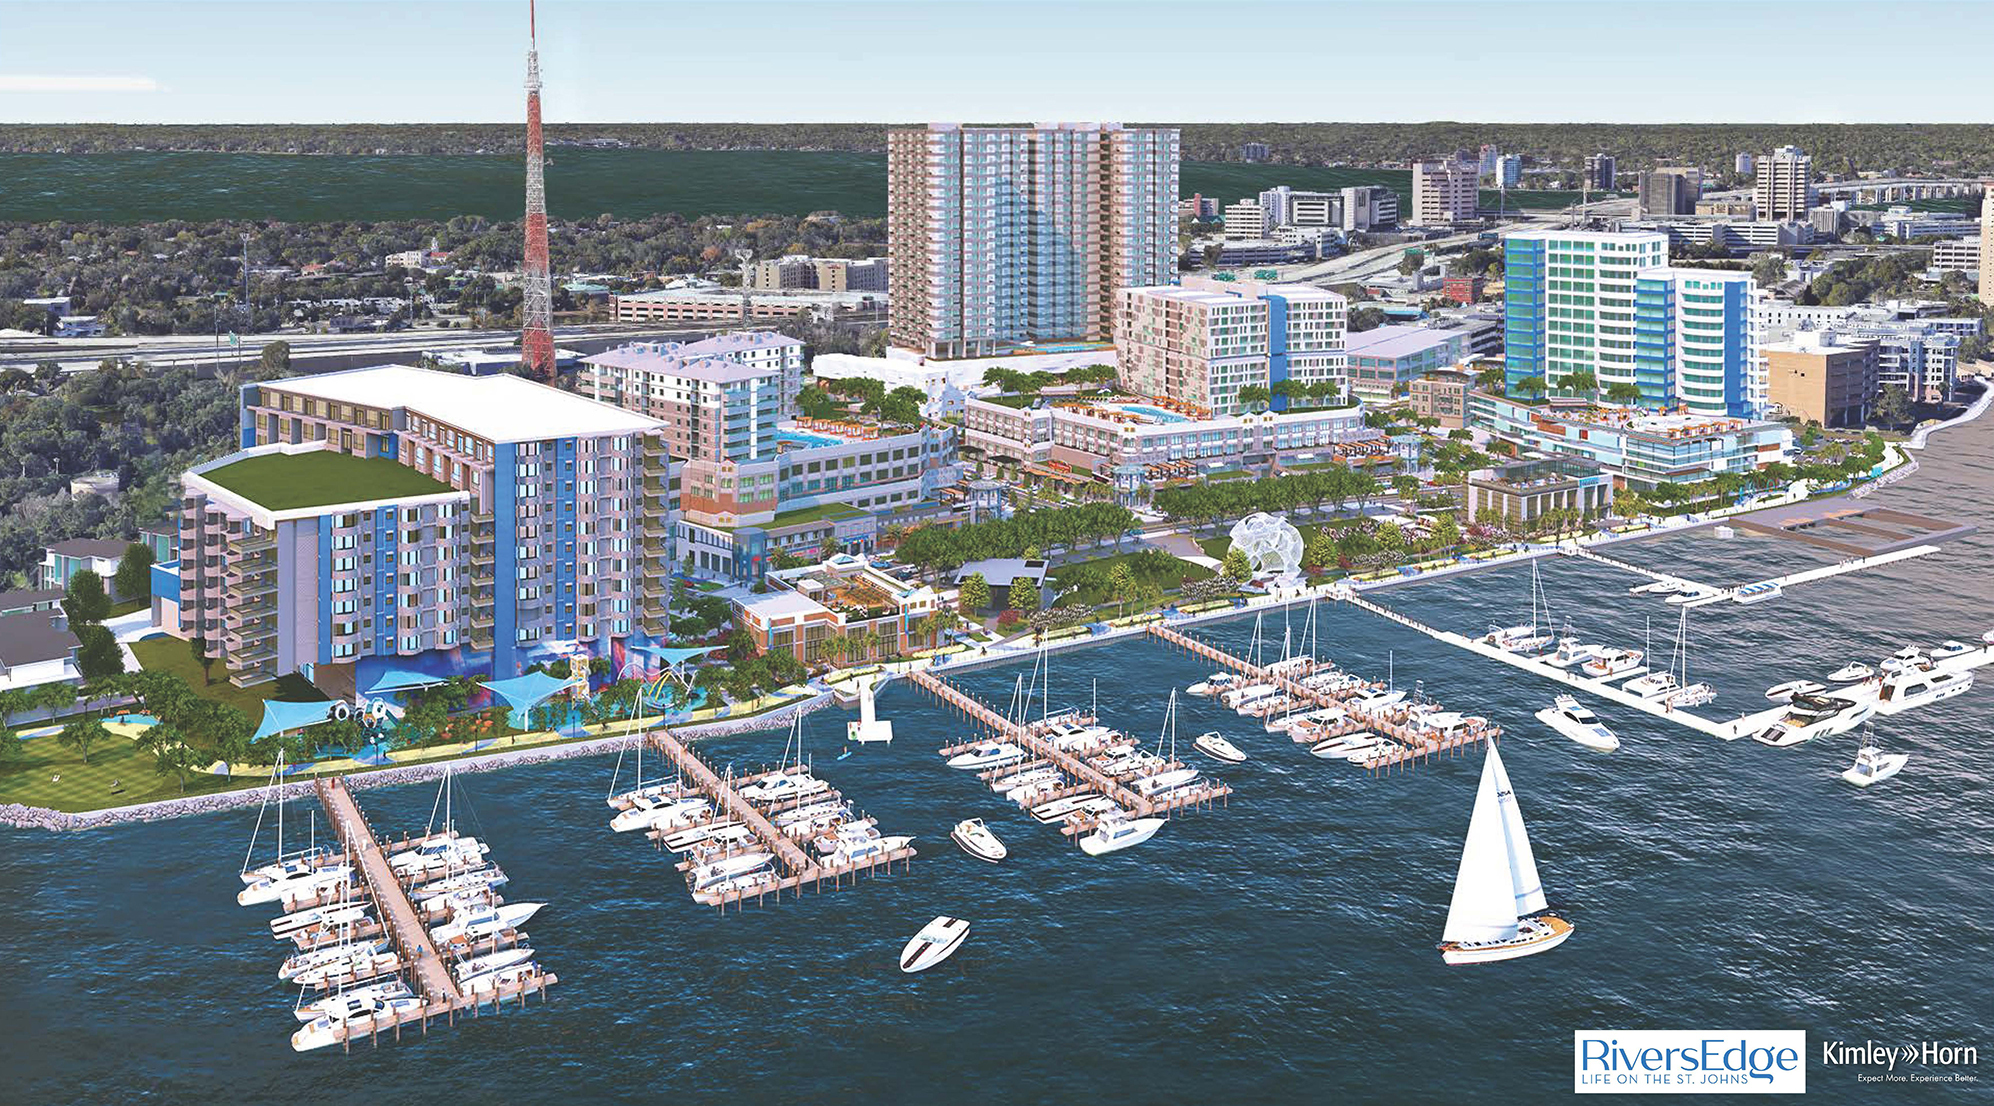 An artist's rendering of RiversEdge along the Downtown Southbank.